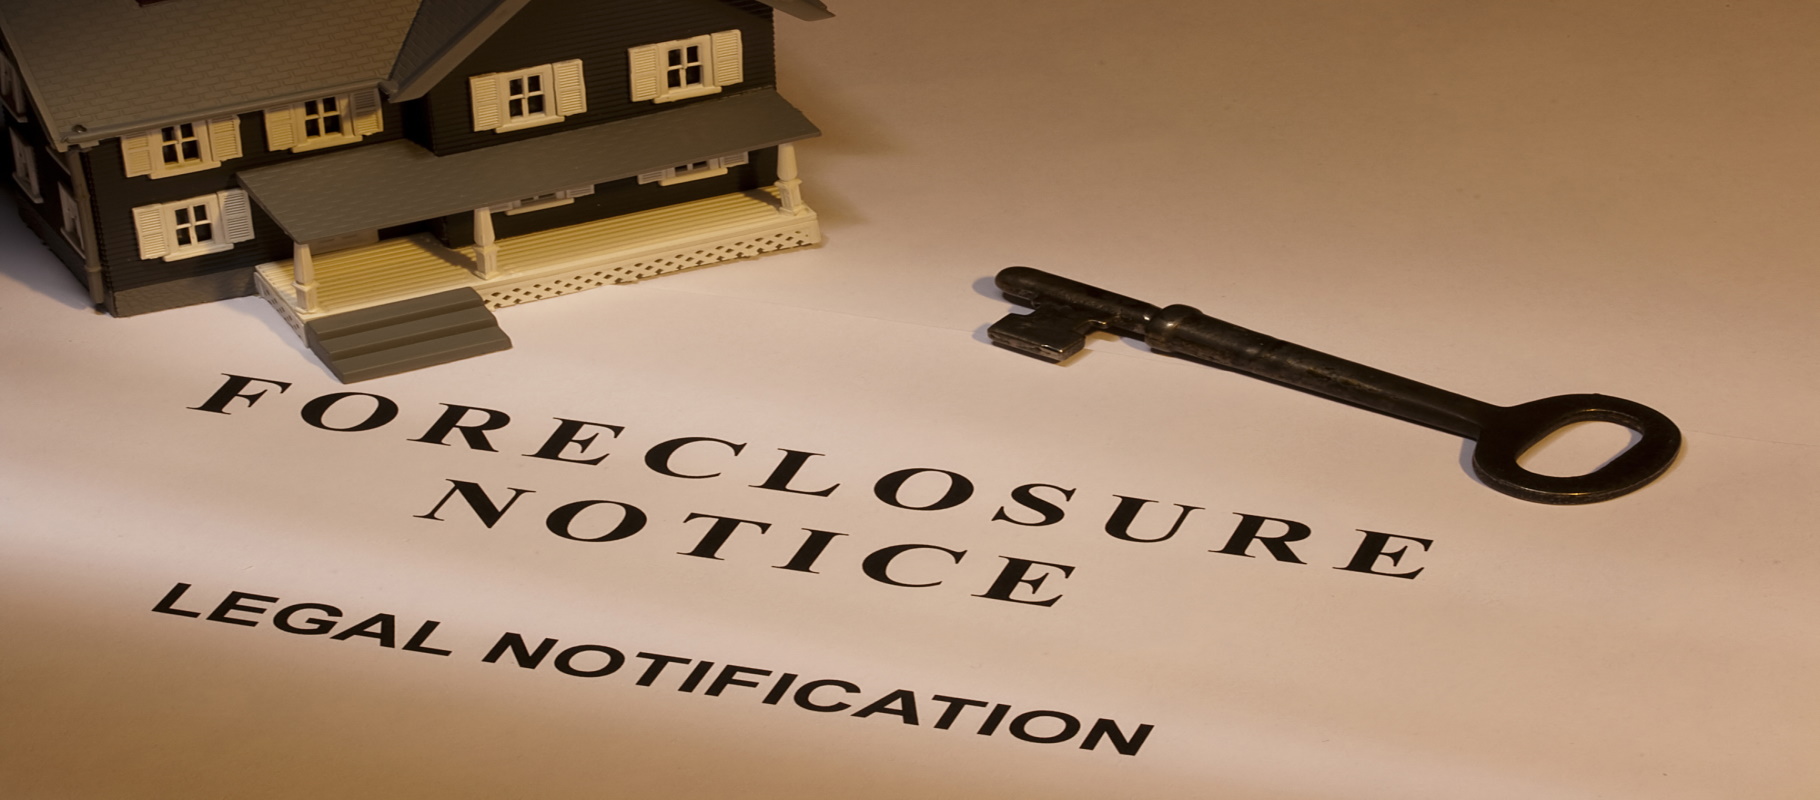 A key laying next to a house model and a foreclosure notice.- Meredith Law Firm, LLC., Foreclosure Attorneys - North Charleston, SC